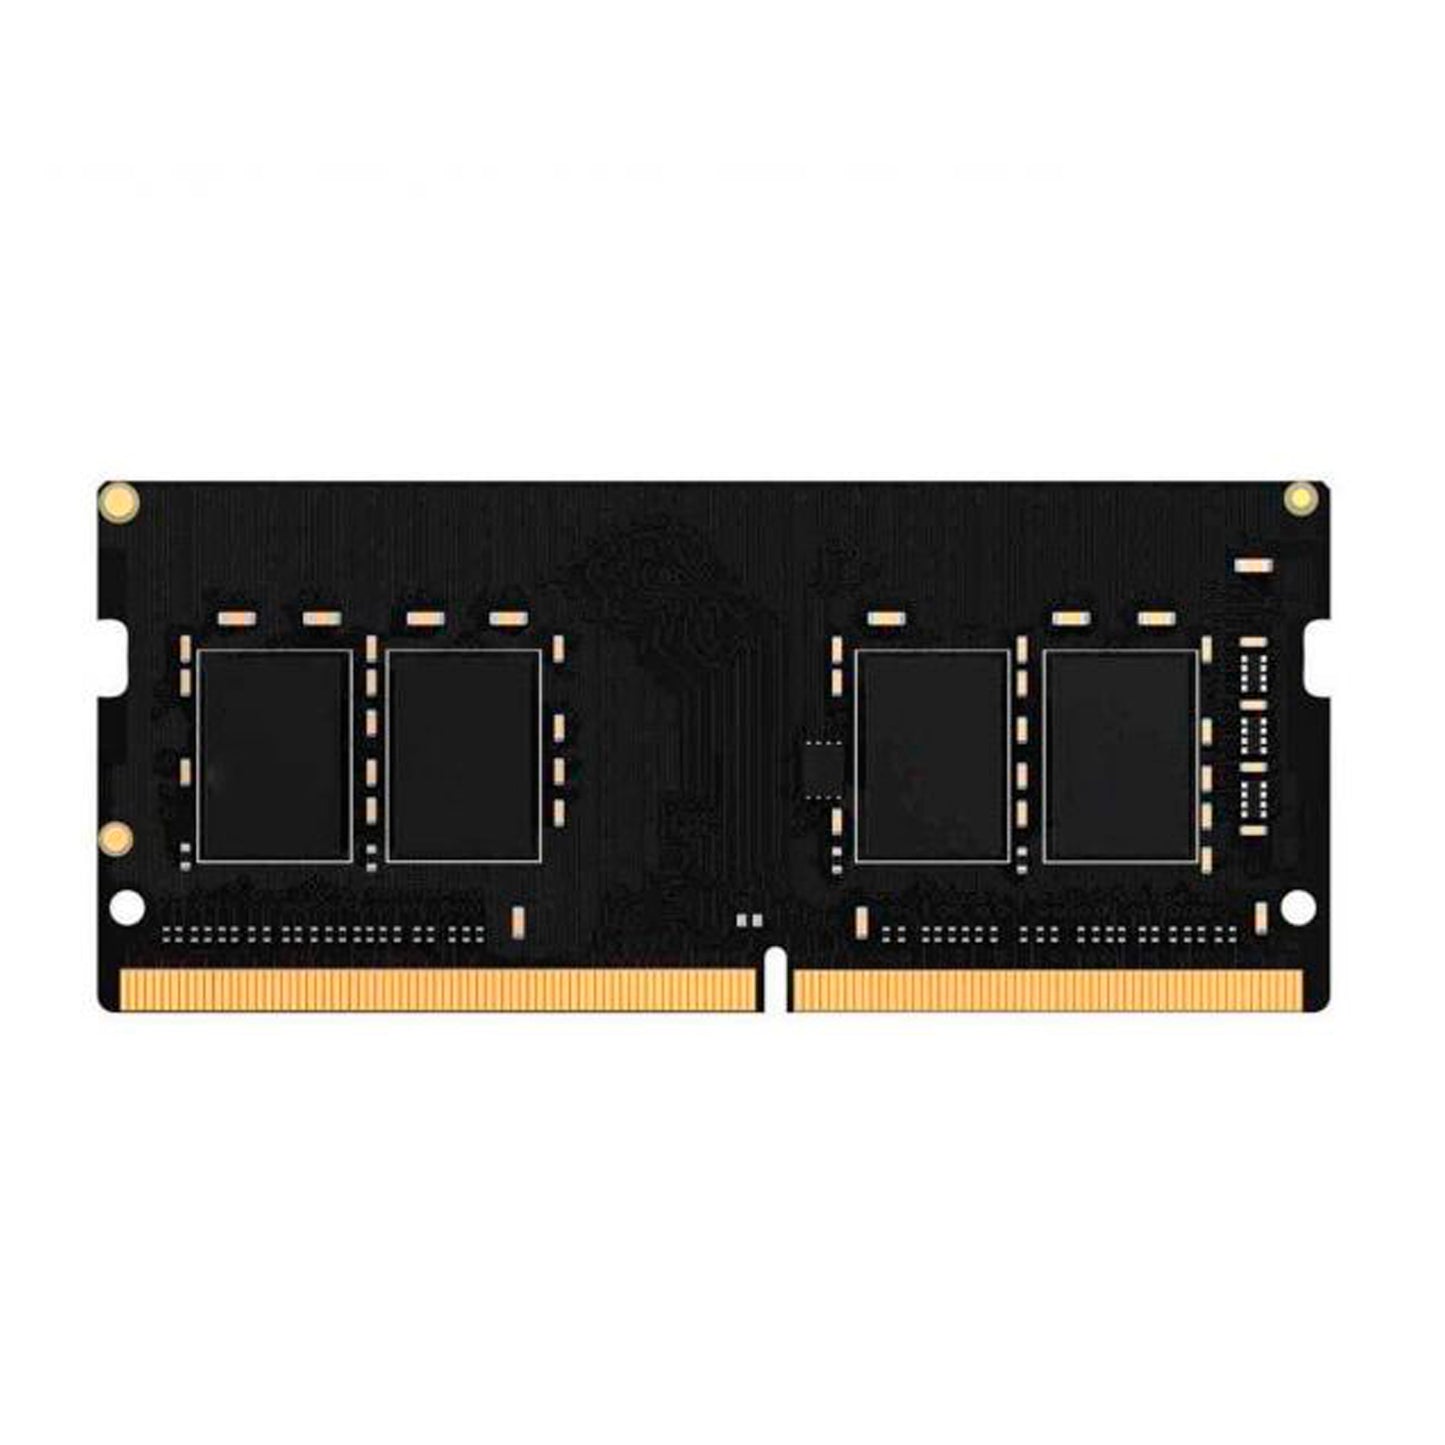 Memoria Ram DDR3 1600 MHZ 4GB HKED3042AAA2A0ZA1 Hikvision